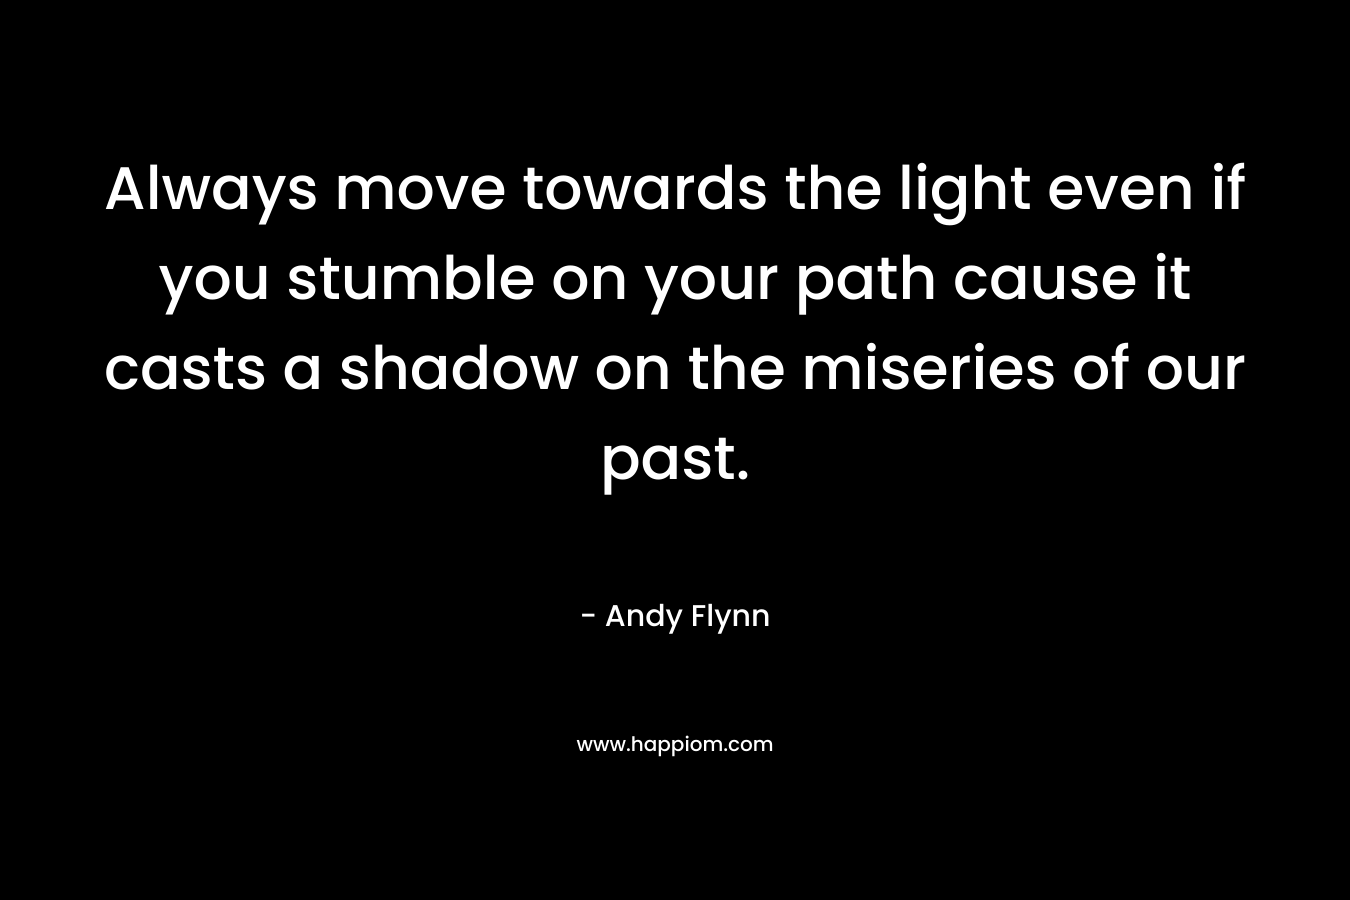 Always move towards the light even if you stumble on your path cause it casts a shadow on the miseries of our past.